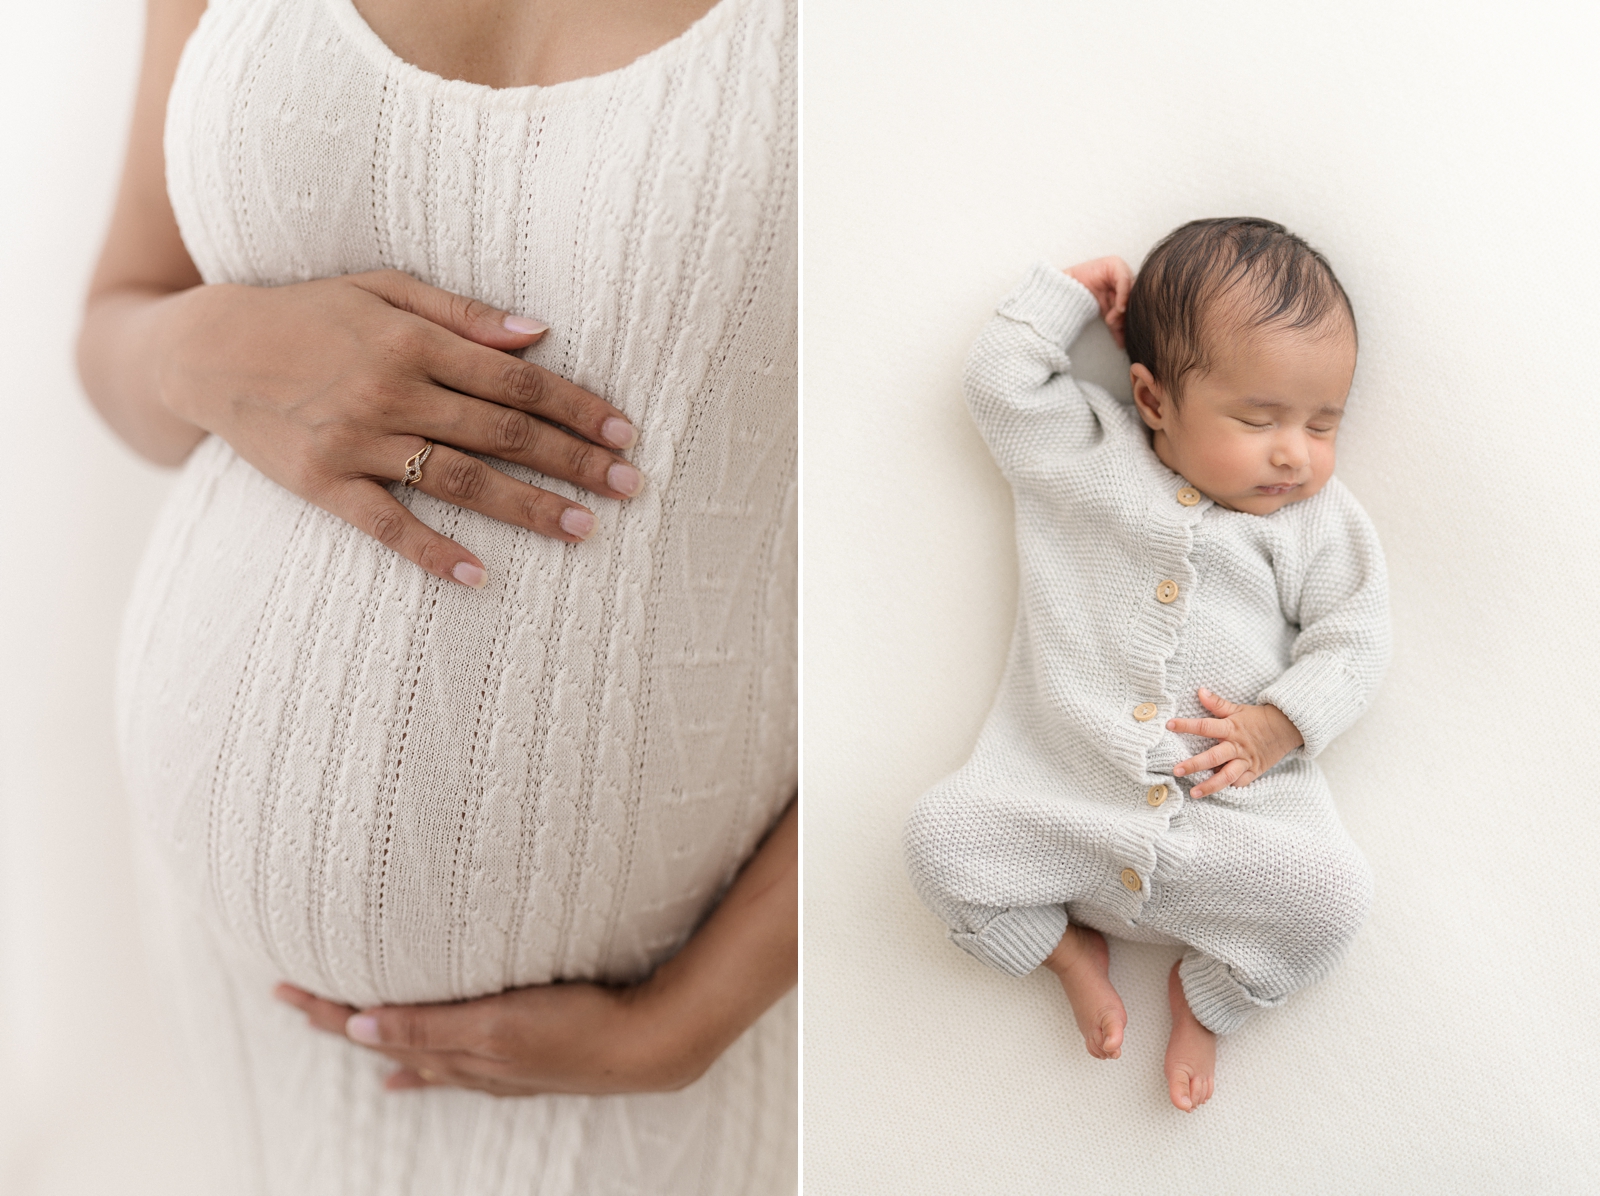 From Belly to Baby: 3 Reasons Maternity and Newborn Photography Is Important
